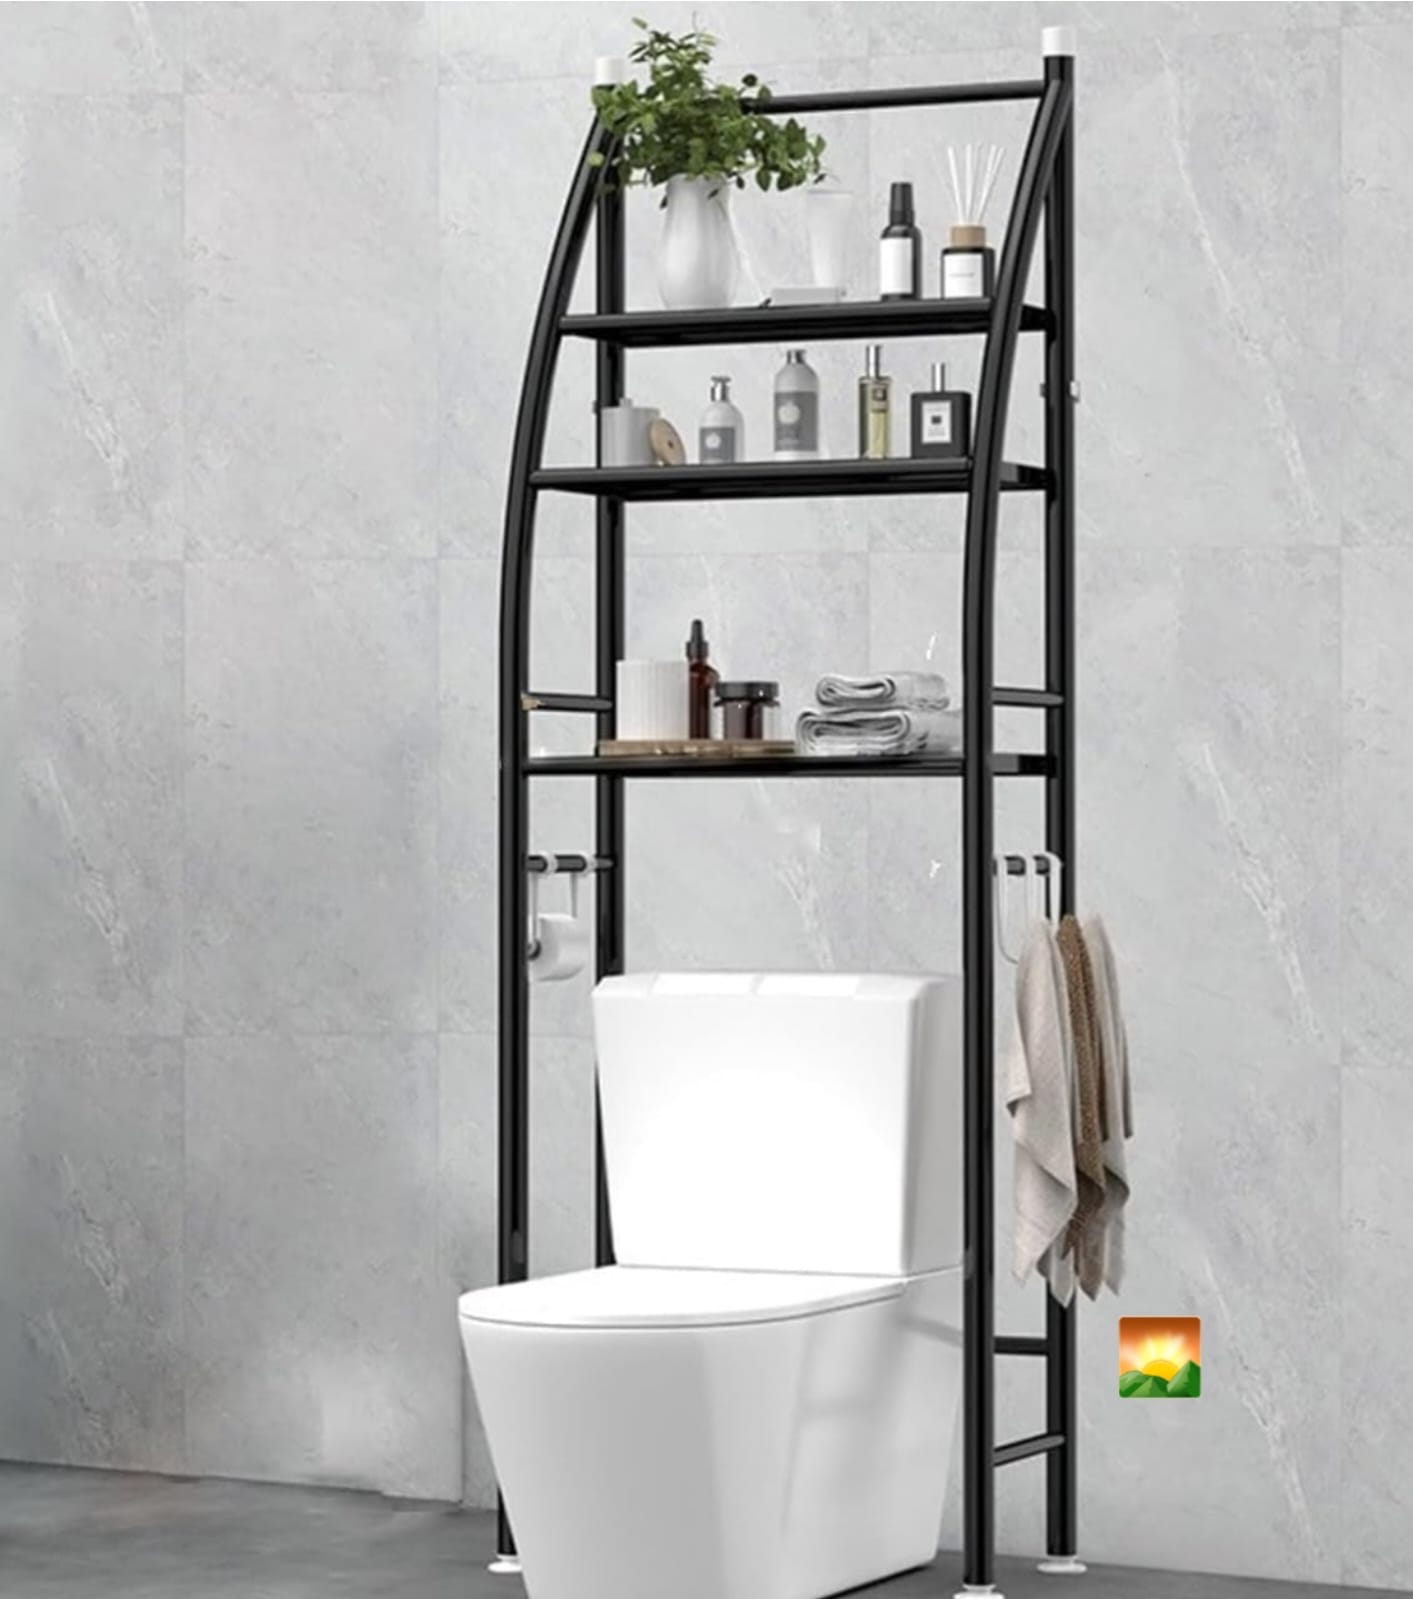 Transform your bathroom with our best-selling stand organizer! Declutter and organize effortlessly with sleek design and ample storage. Perfect for maximizing space while enhancing style.